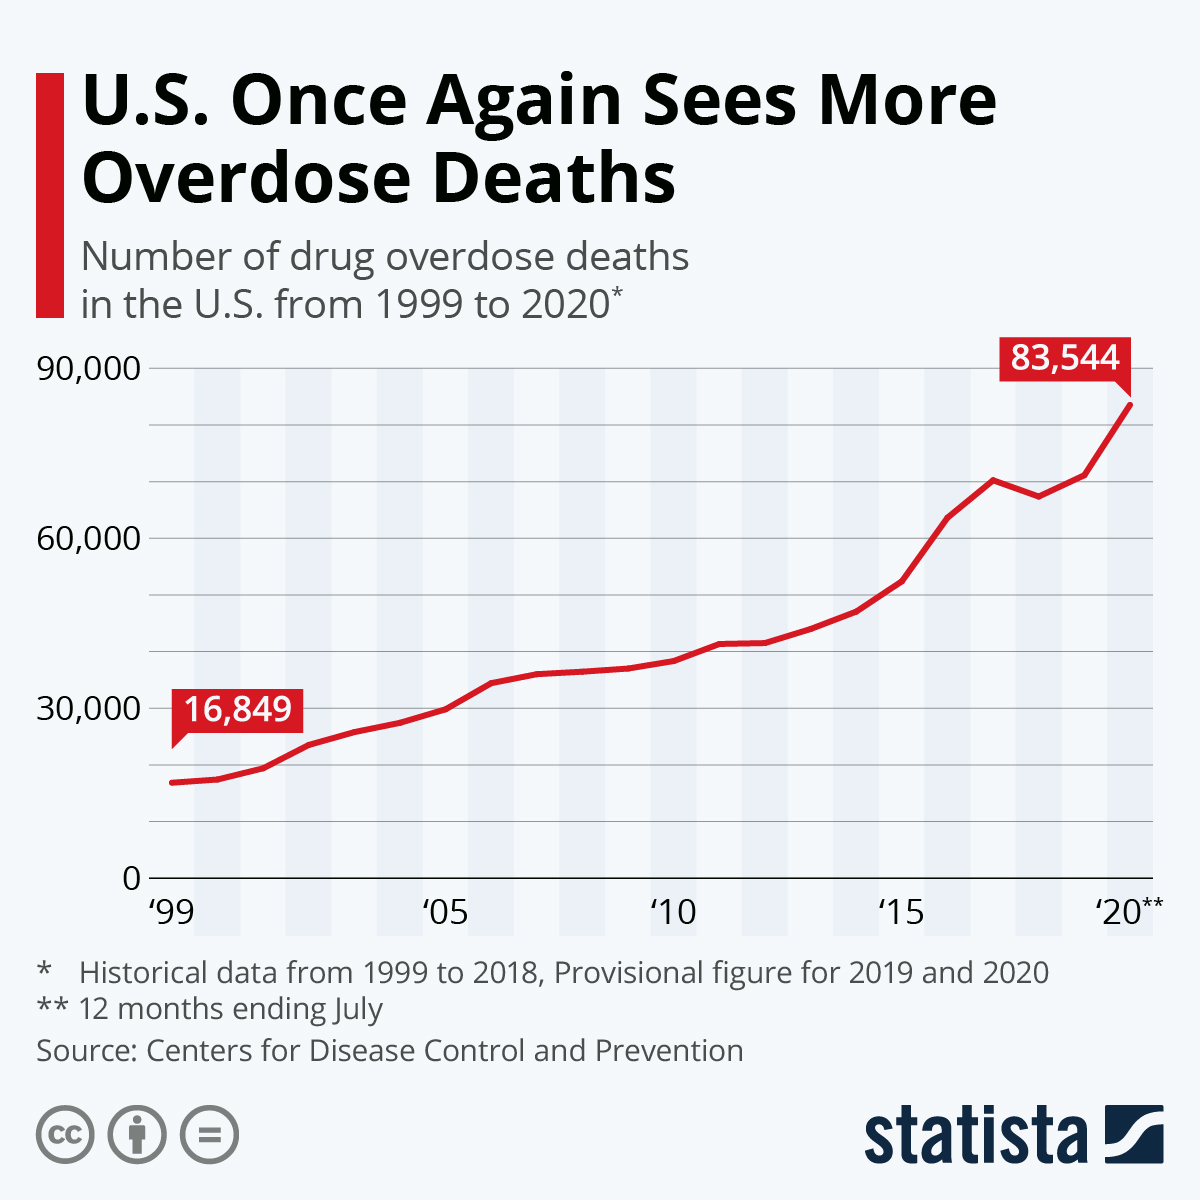 U.S. Once Again Sees More Overdose Deaths